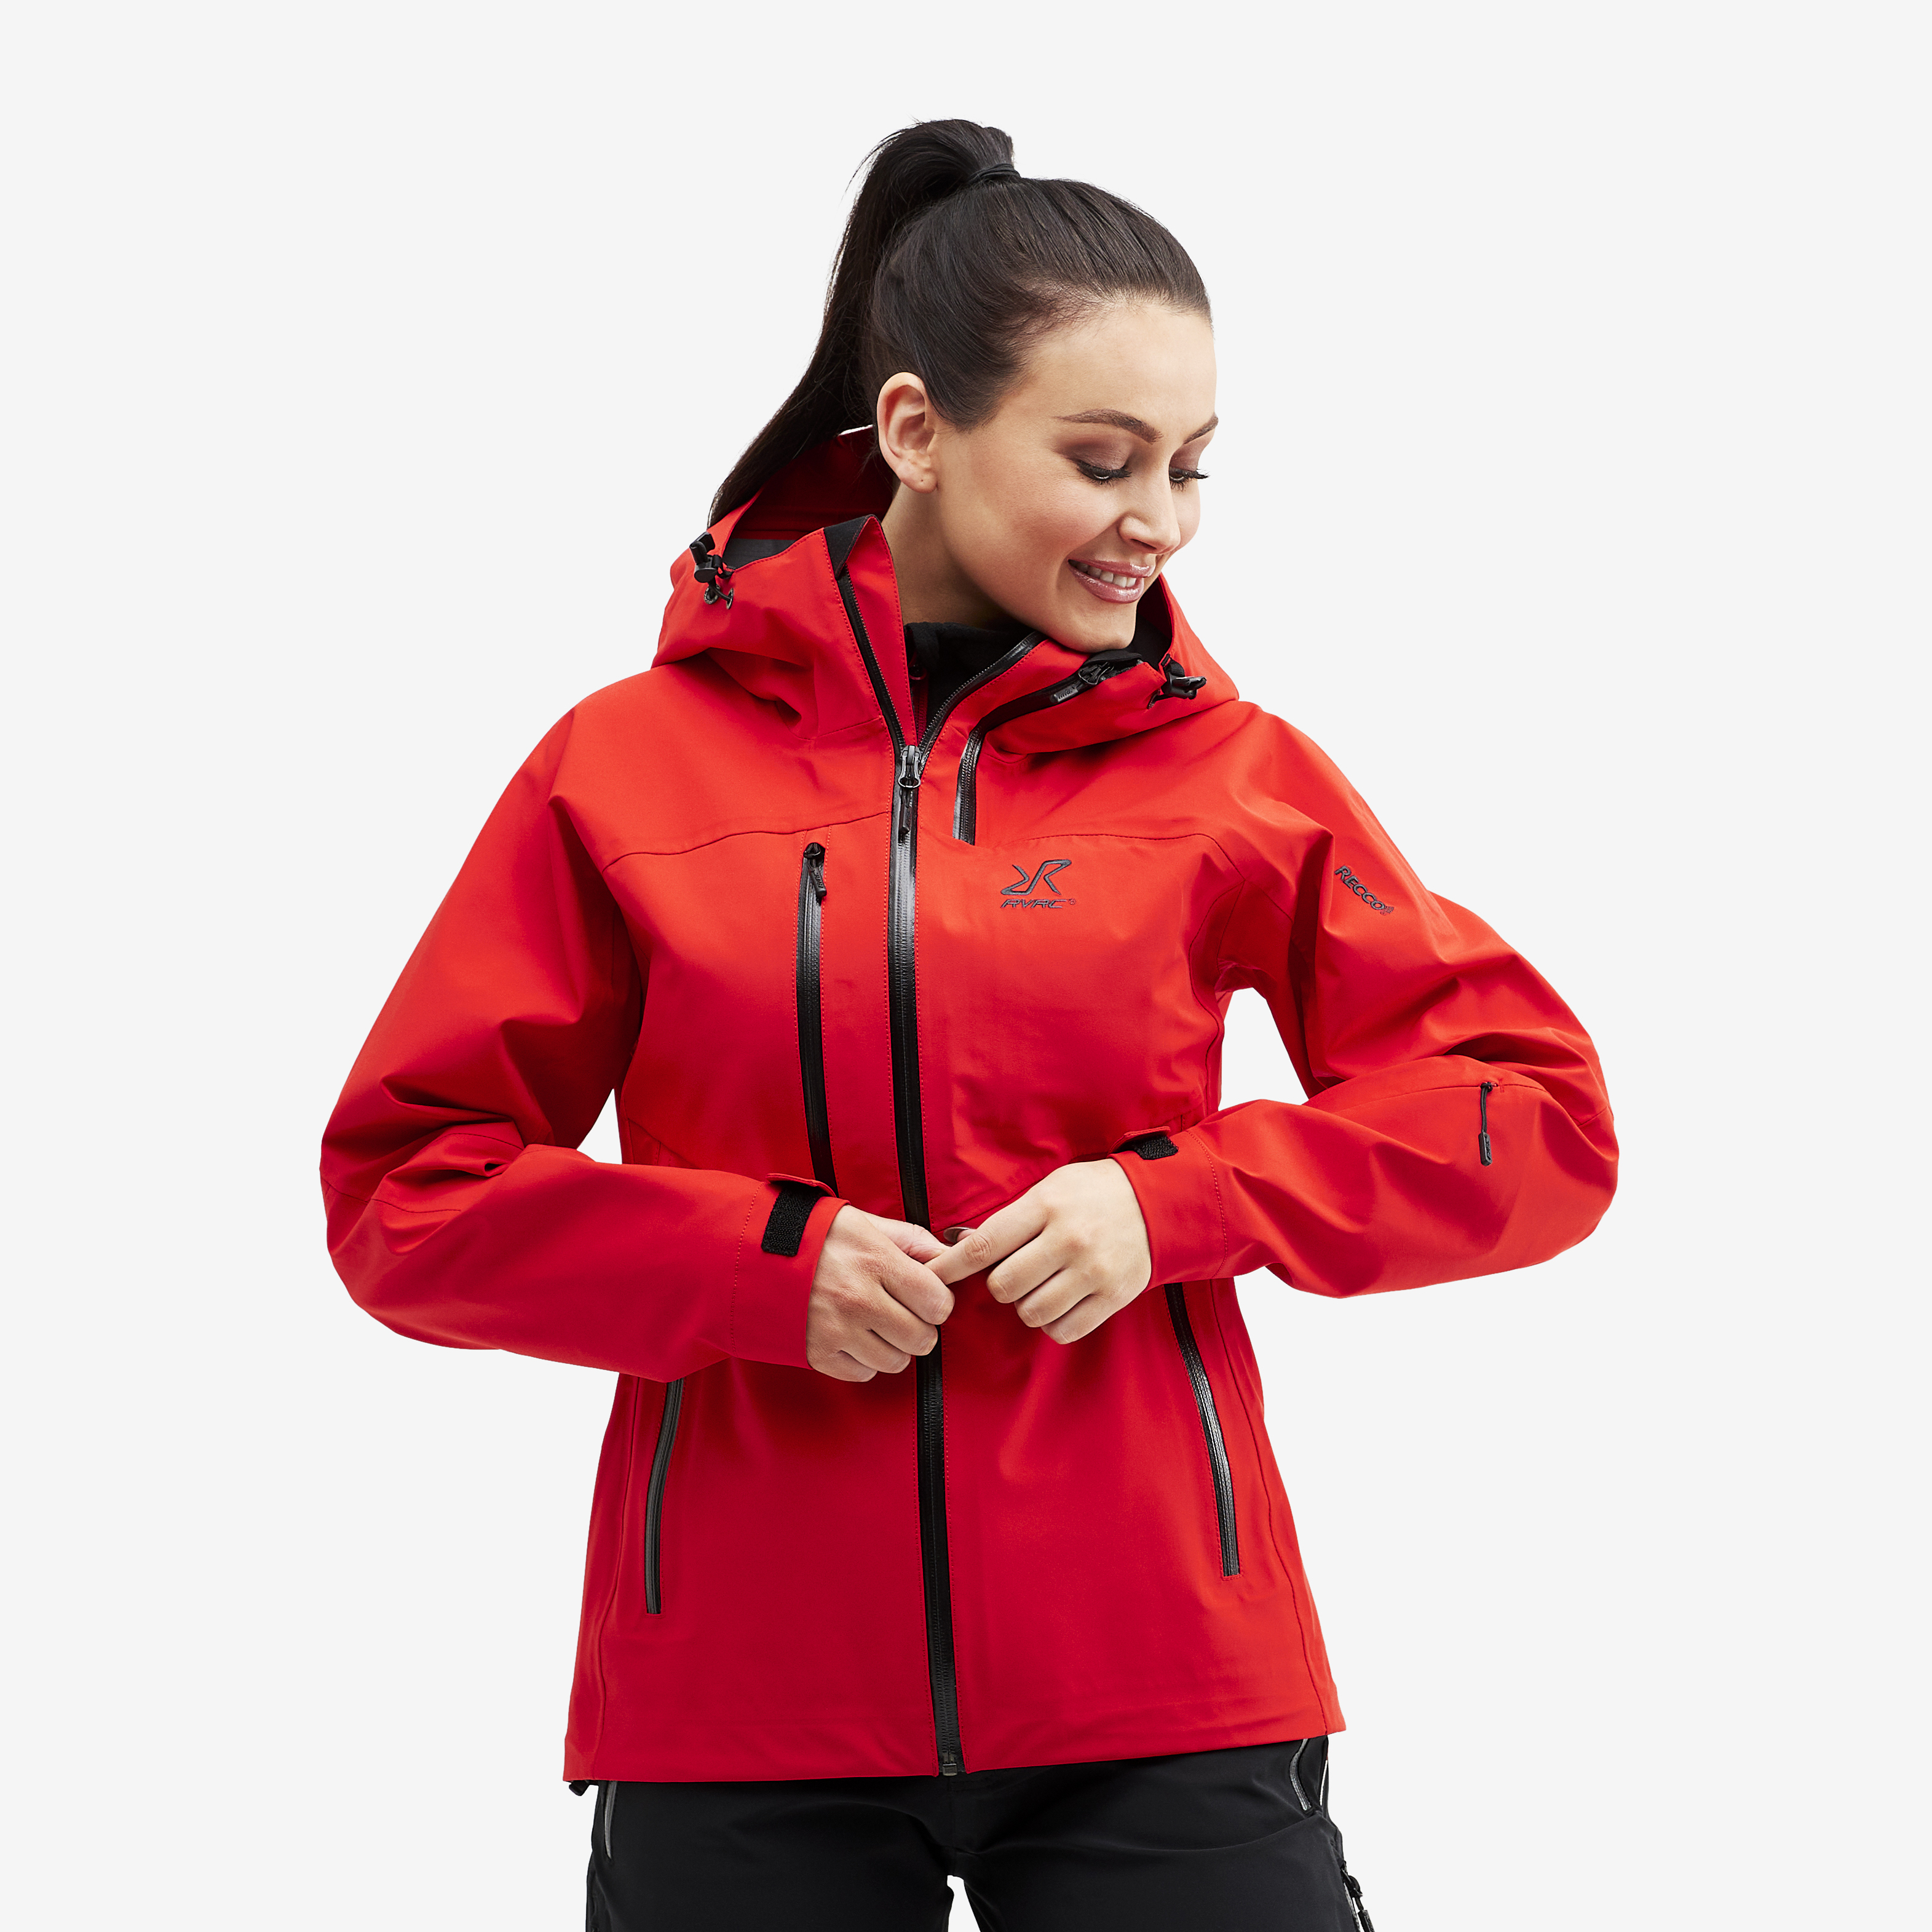 Cyclone Rescue Jacket 2.0 Flame Scarlet Naiset